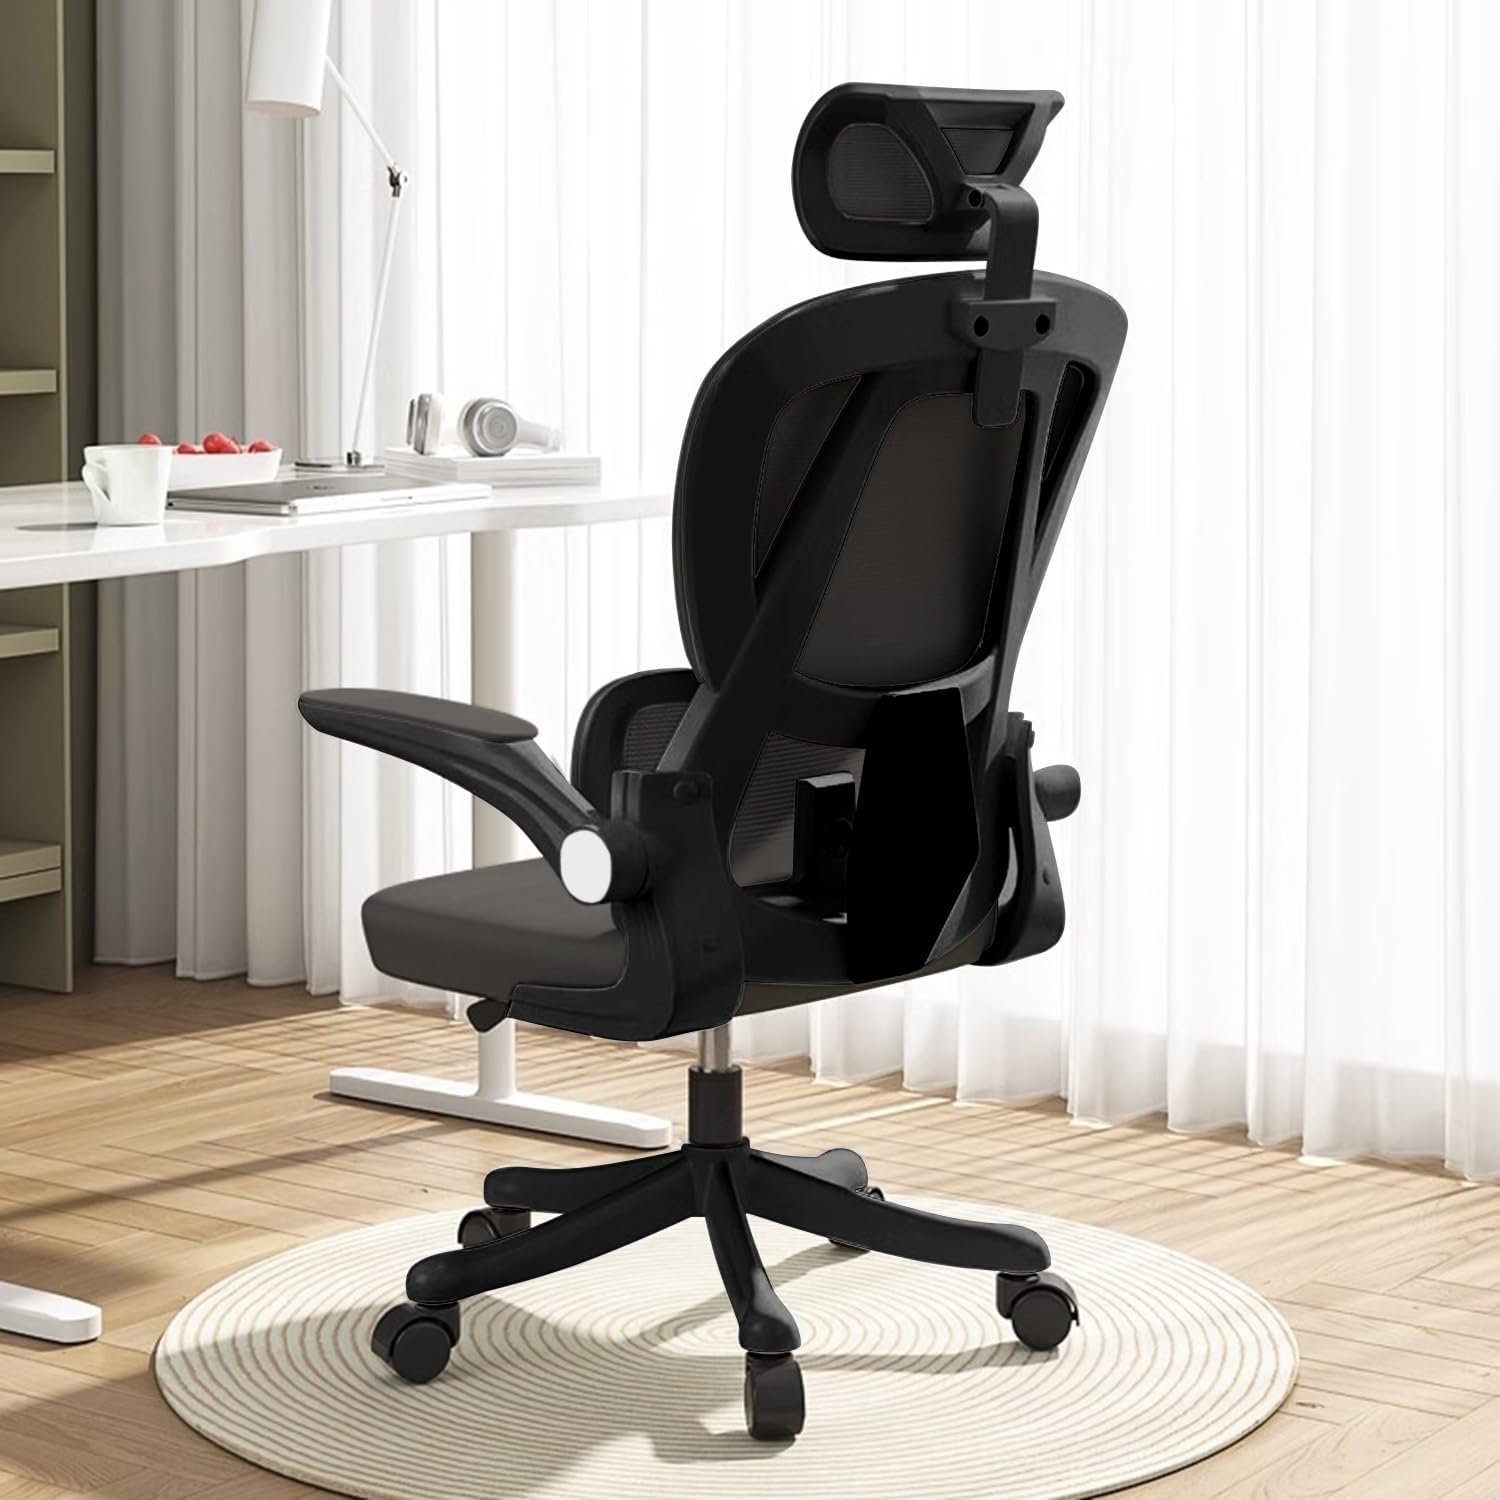 Office Chair High Back Ergonomic Office Chair with Lumbar Support Adjustable Headrest 3D Armrest and Lumbar Support for Home Office Chair Swivel Mesh Office Chair for Work, Study, Gaming